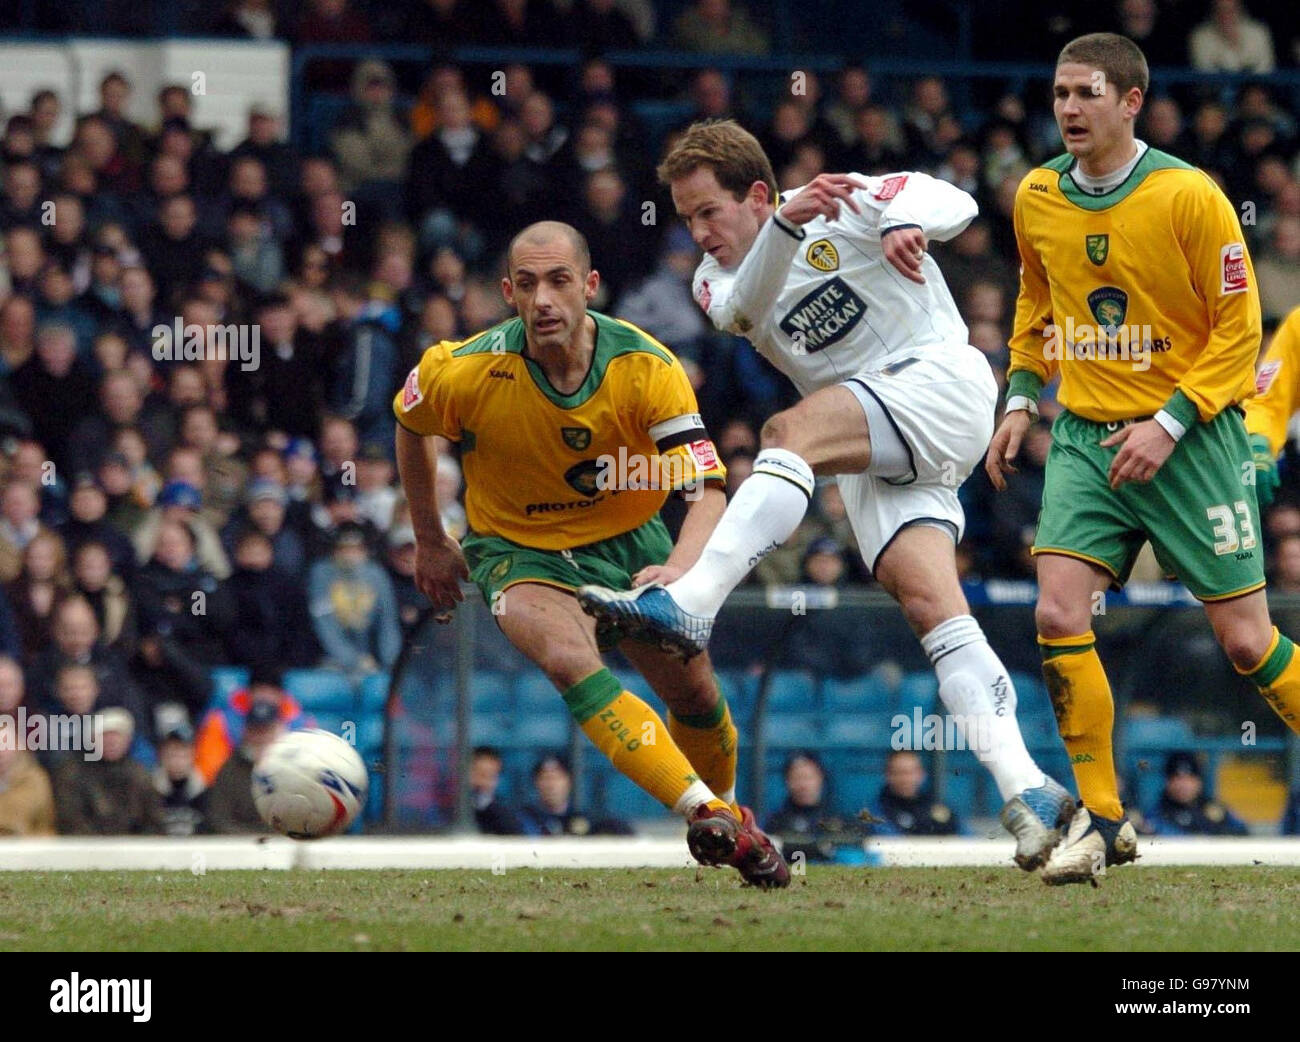 Leeds United's Eddie Lewis (C) takes a shot which was blocked during the Coca-Cola Championship match against Norwich at Elland Road, Leeds, Saturday March 11, 2006. PRESS ASSOCIATION Photo. Photo credit should read: John Jones/PA. . Stock Photo